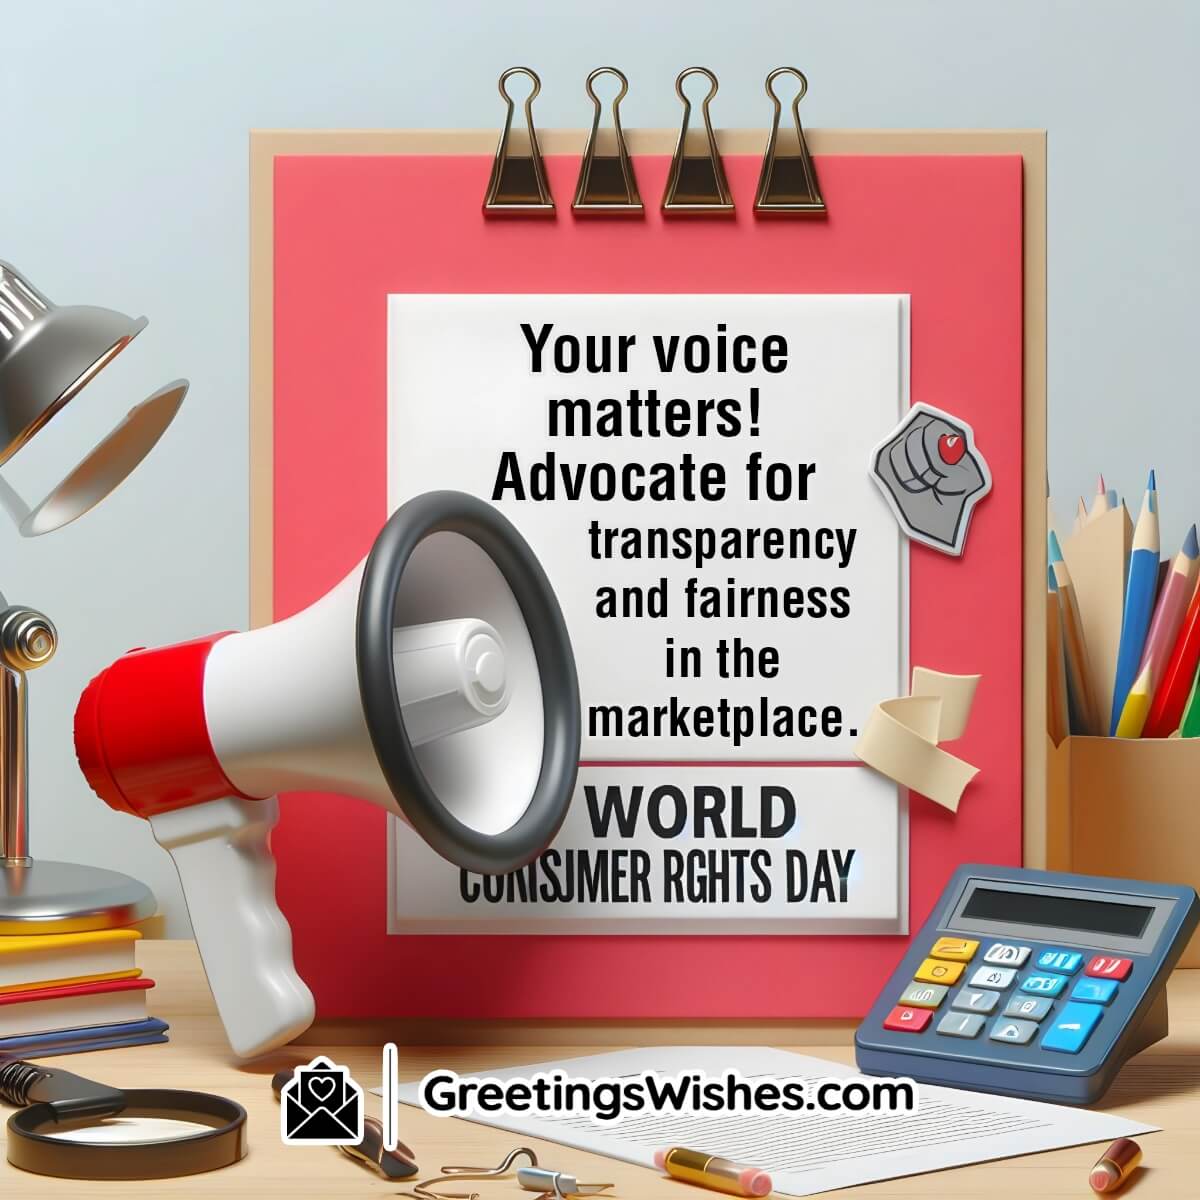 World Consumer Rights Day Message